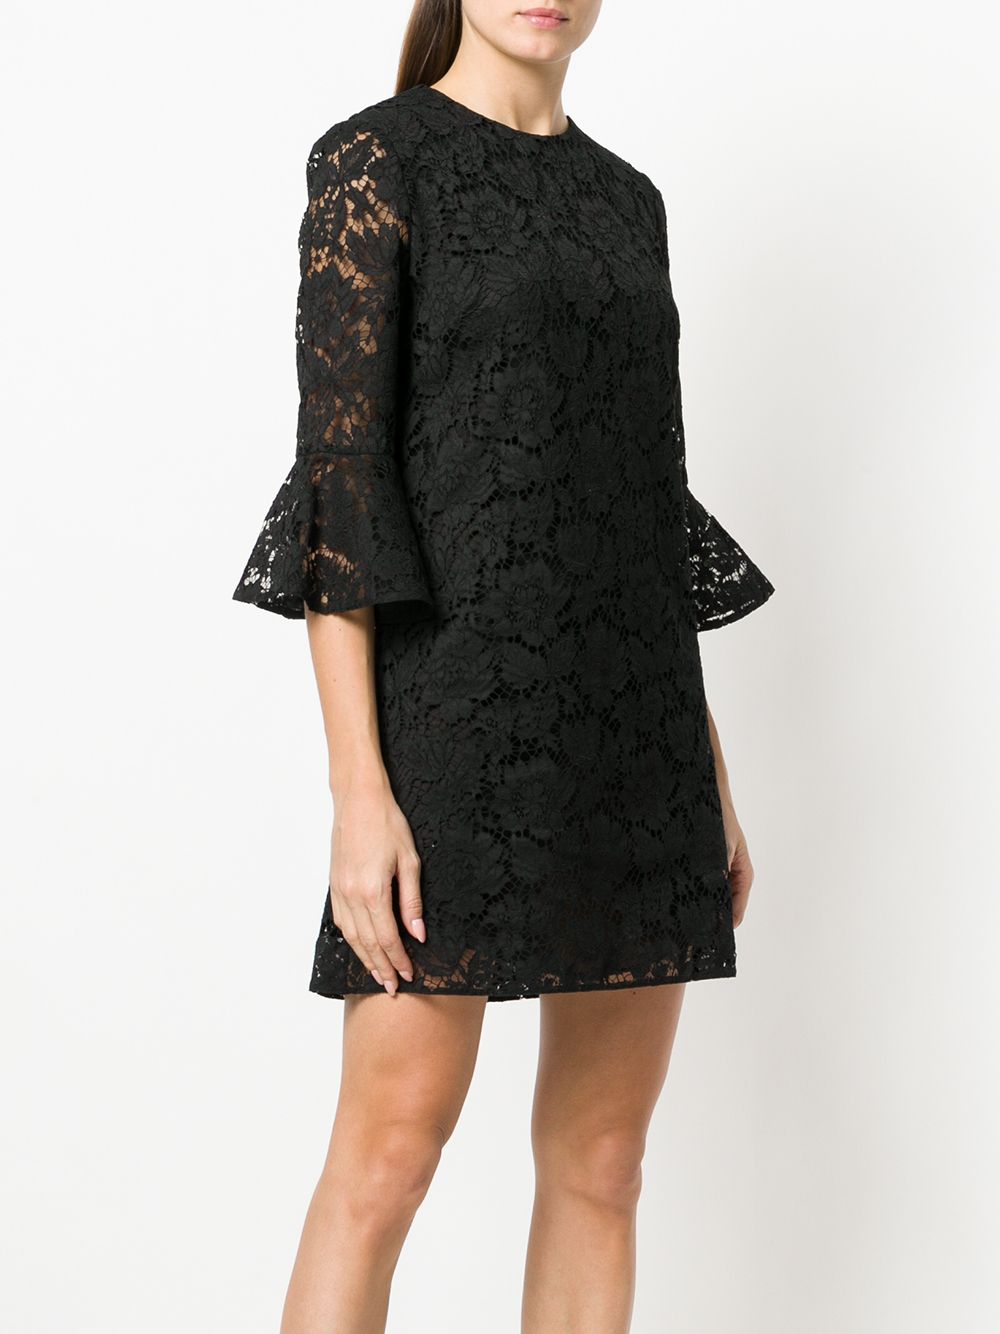 Shop black Valentino Heavy Lace dress with Express Delivery - Farfetch